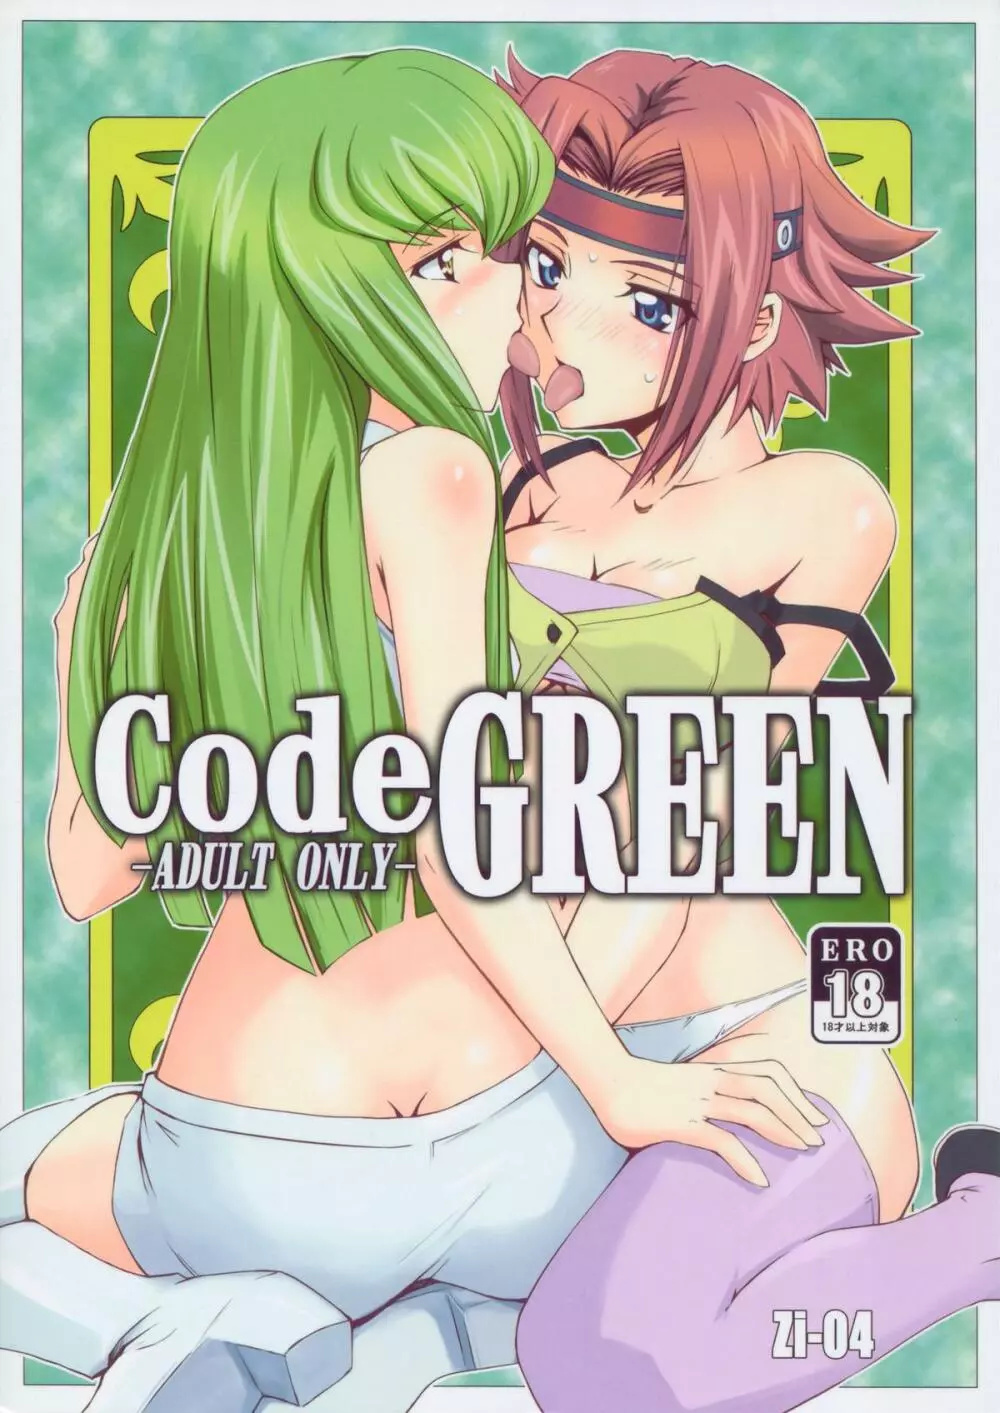 CodeGREEN Page.1